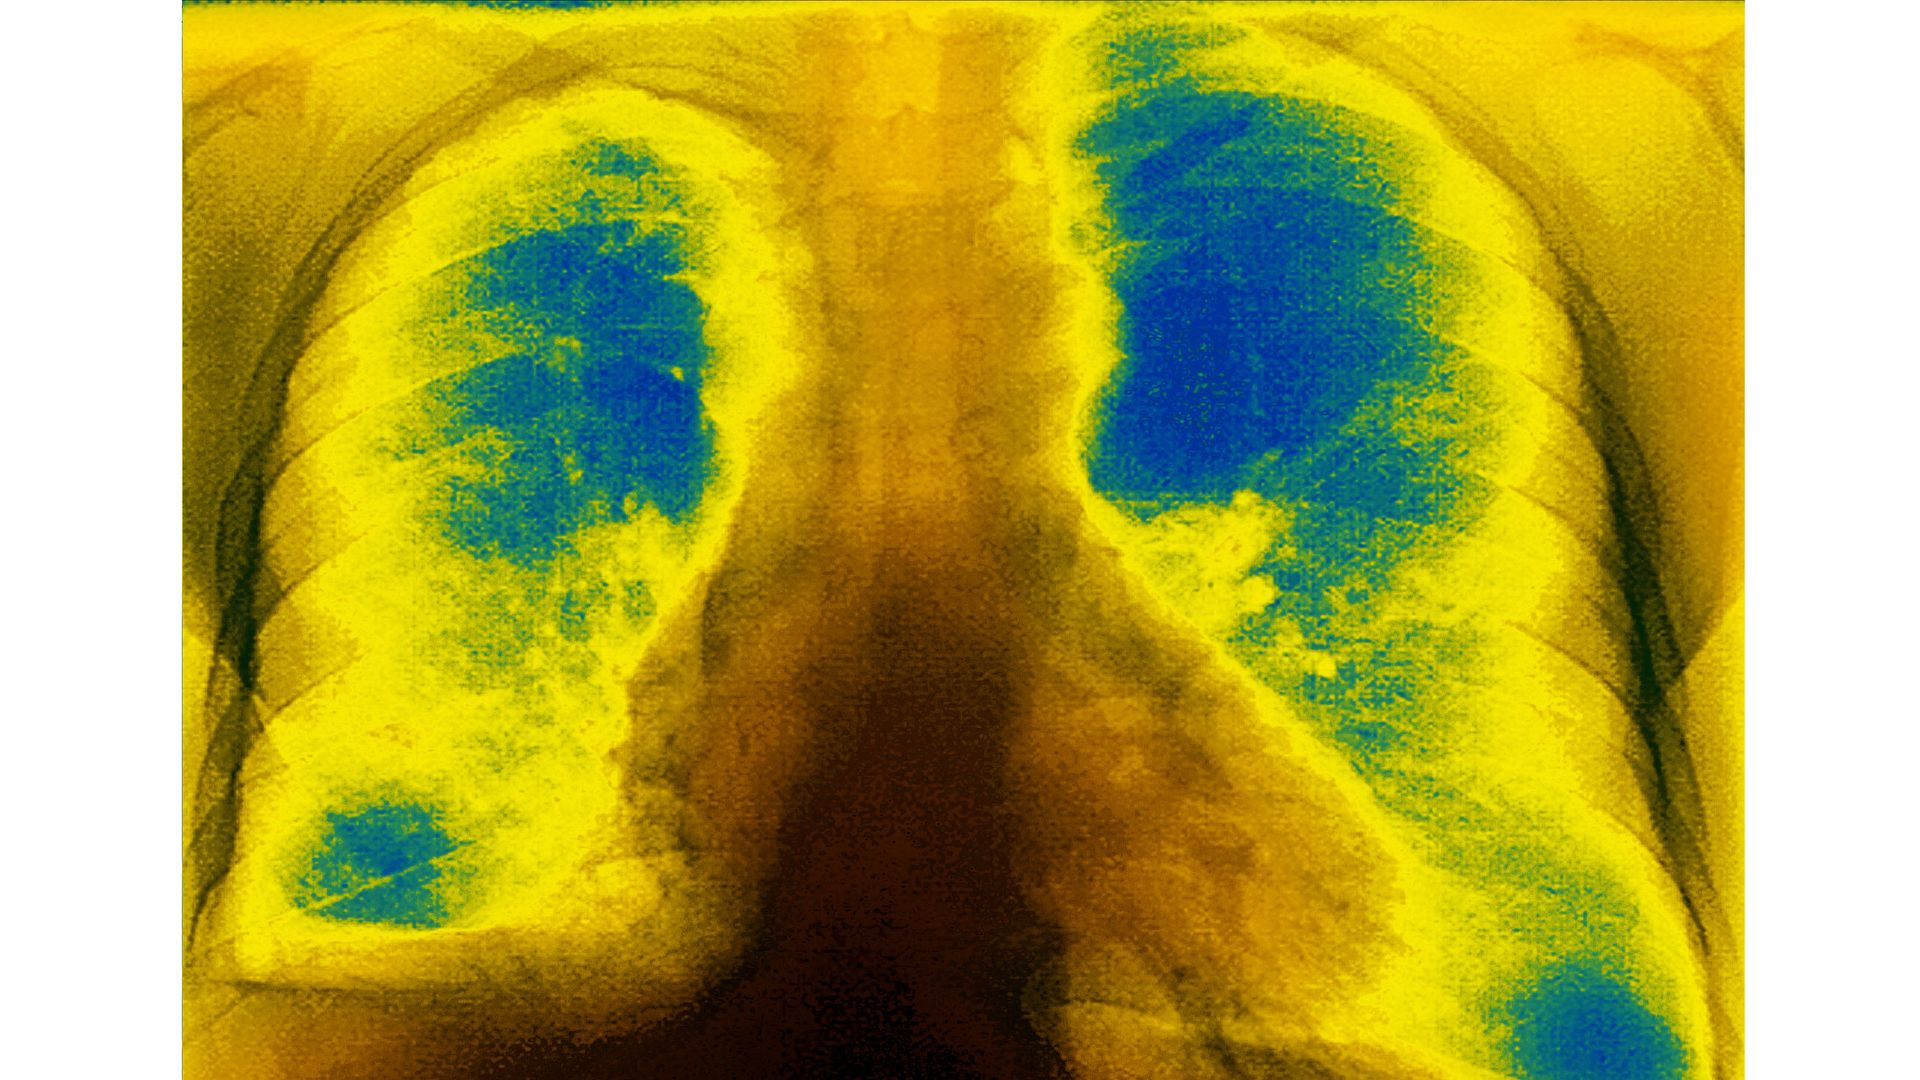 Mucoviscidosis (accumulation of mucus in the respiratory tract), seen on a frontal x-ray of the chest. (Photo by: BSIP/Universal Images Group via Getty Images)